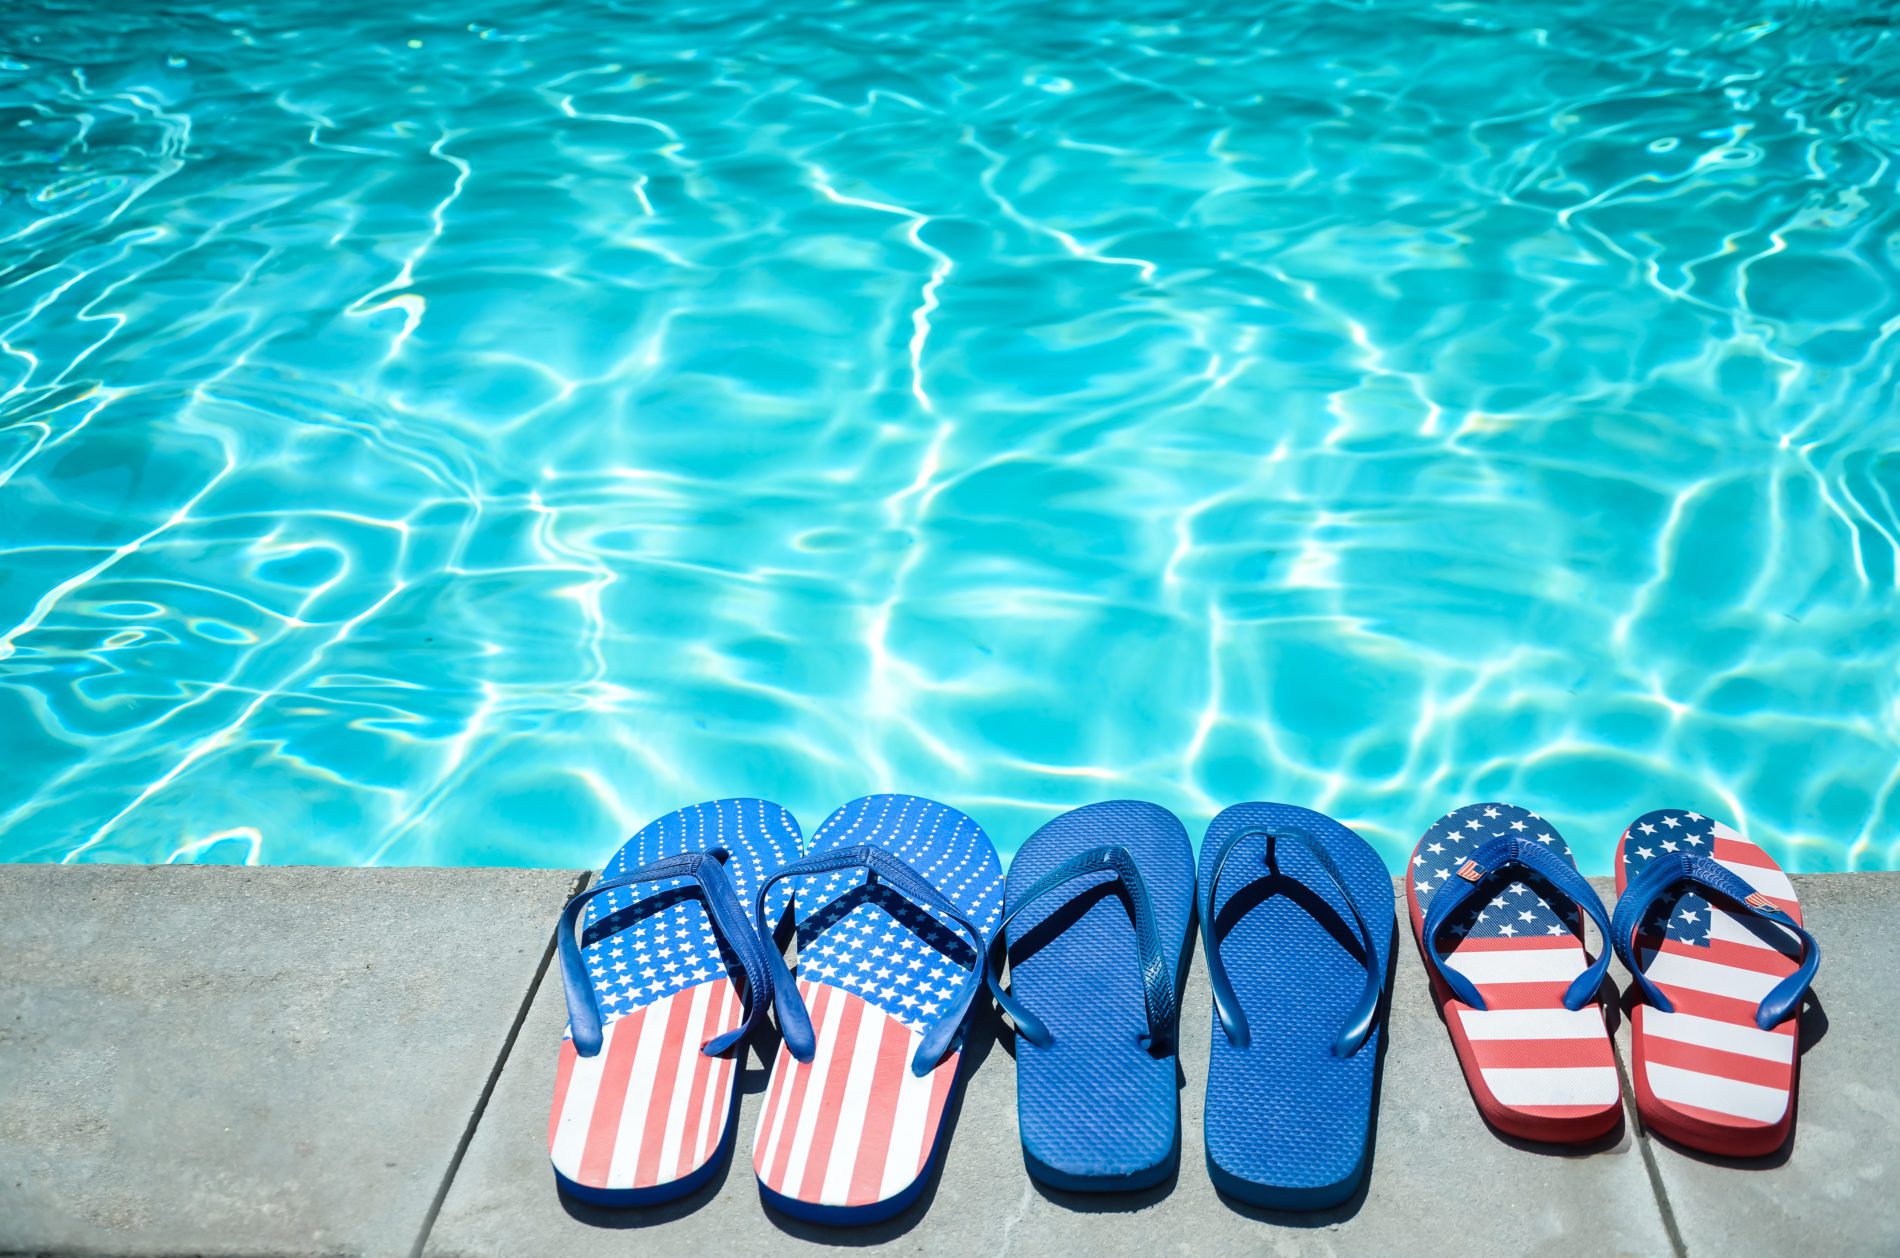 Summer background with flip flops of American flag colors and pattern near the swimming pool